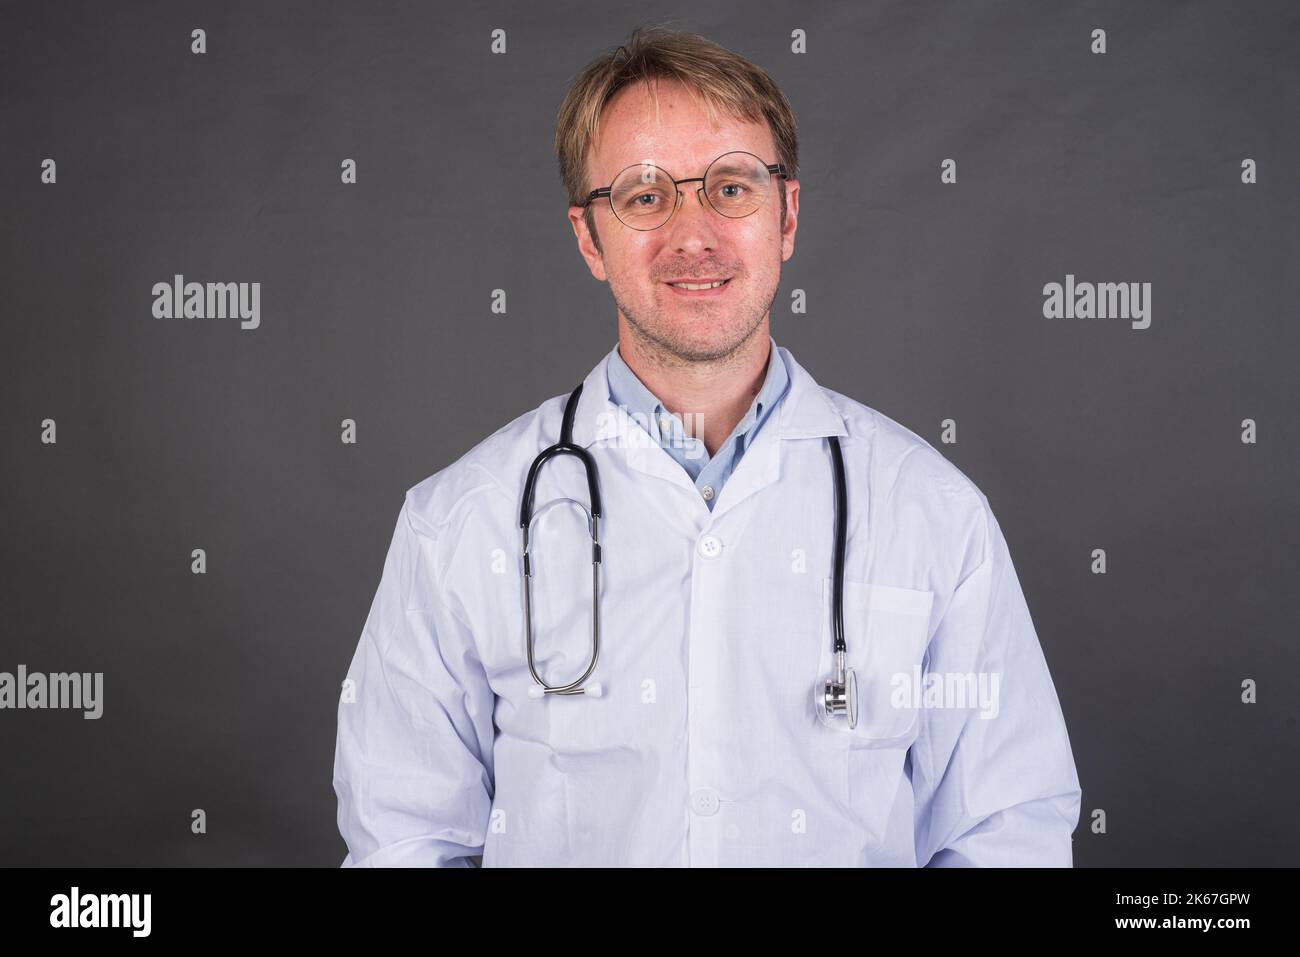 Happy male doctor with stethoscope over neck in medical coat against gray background Stock Photo